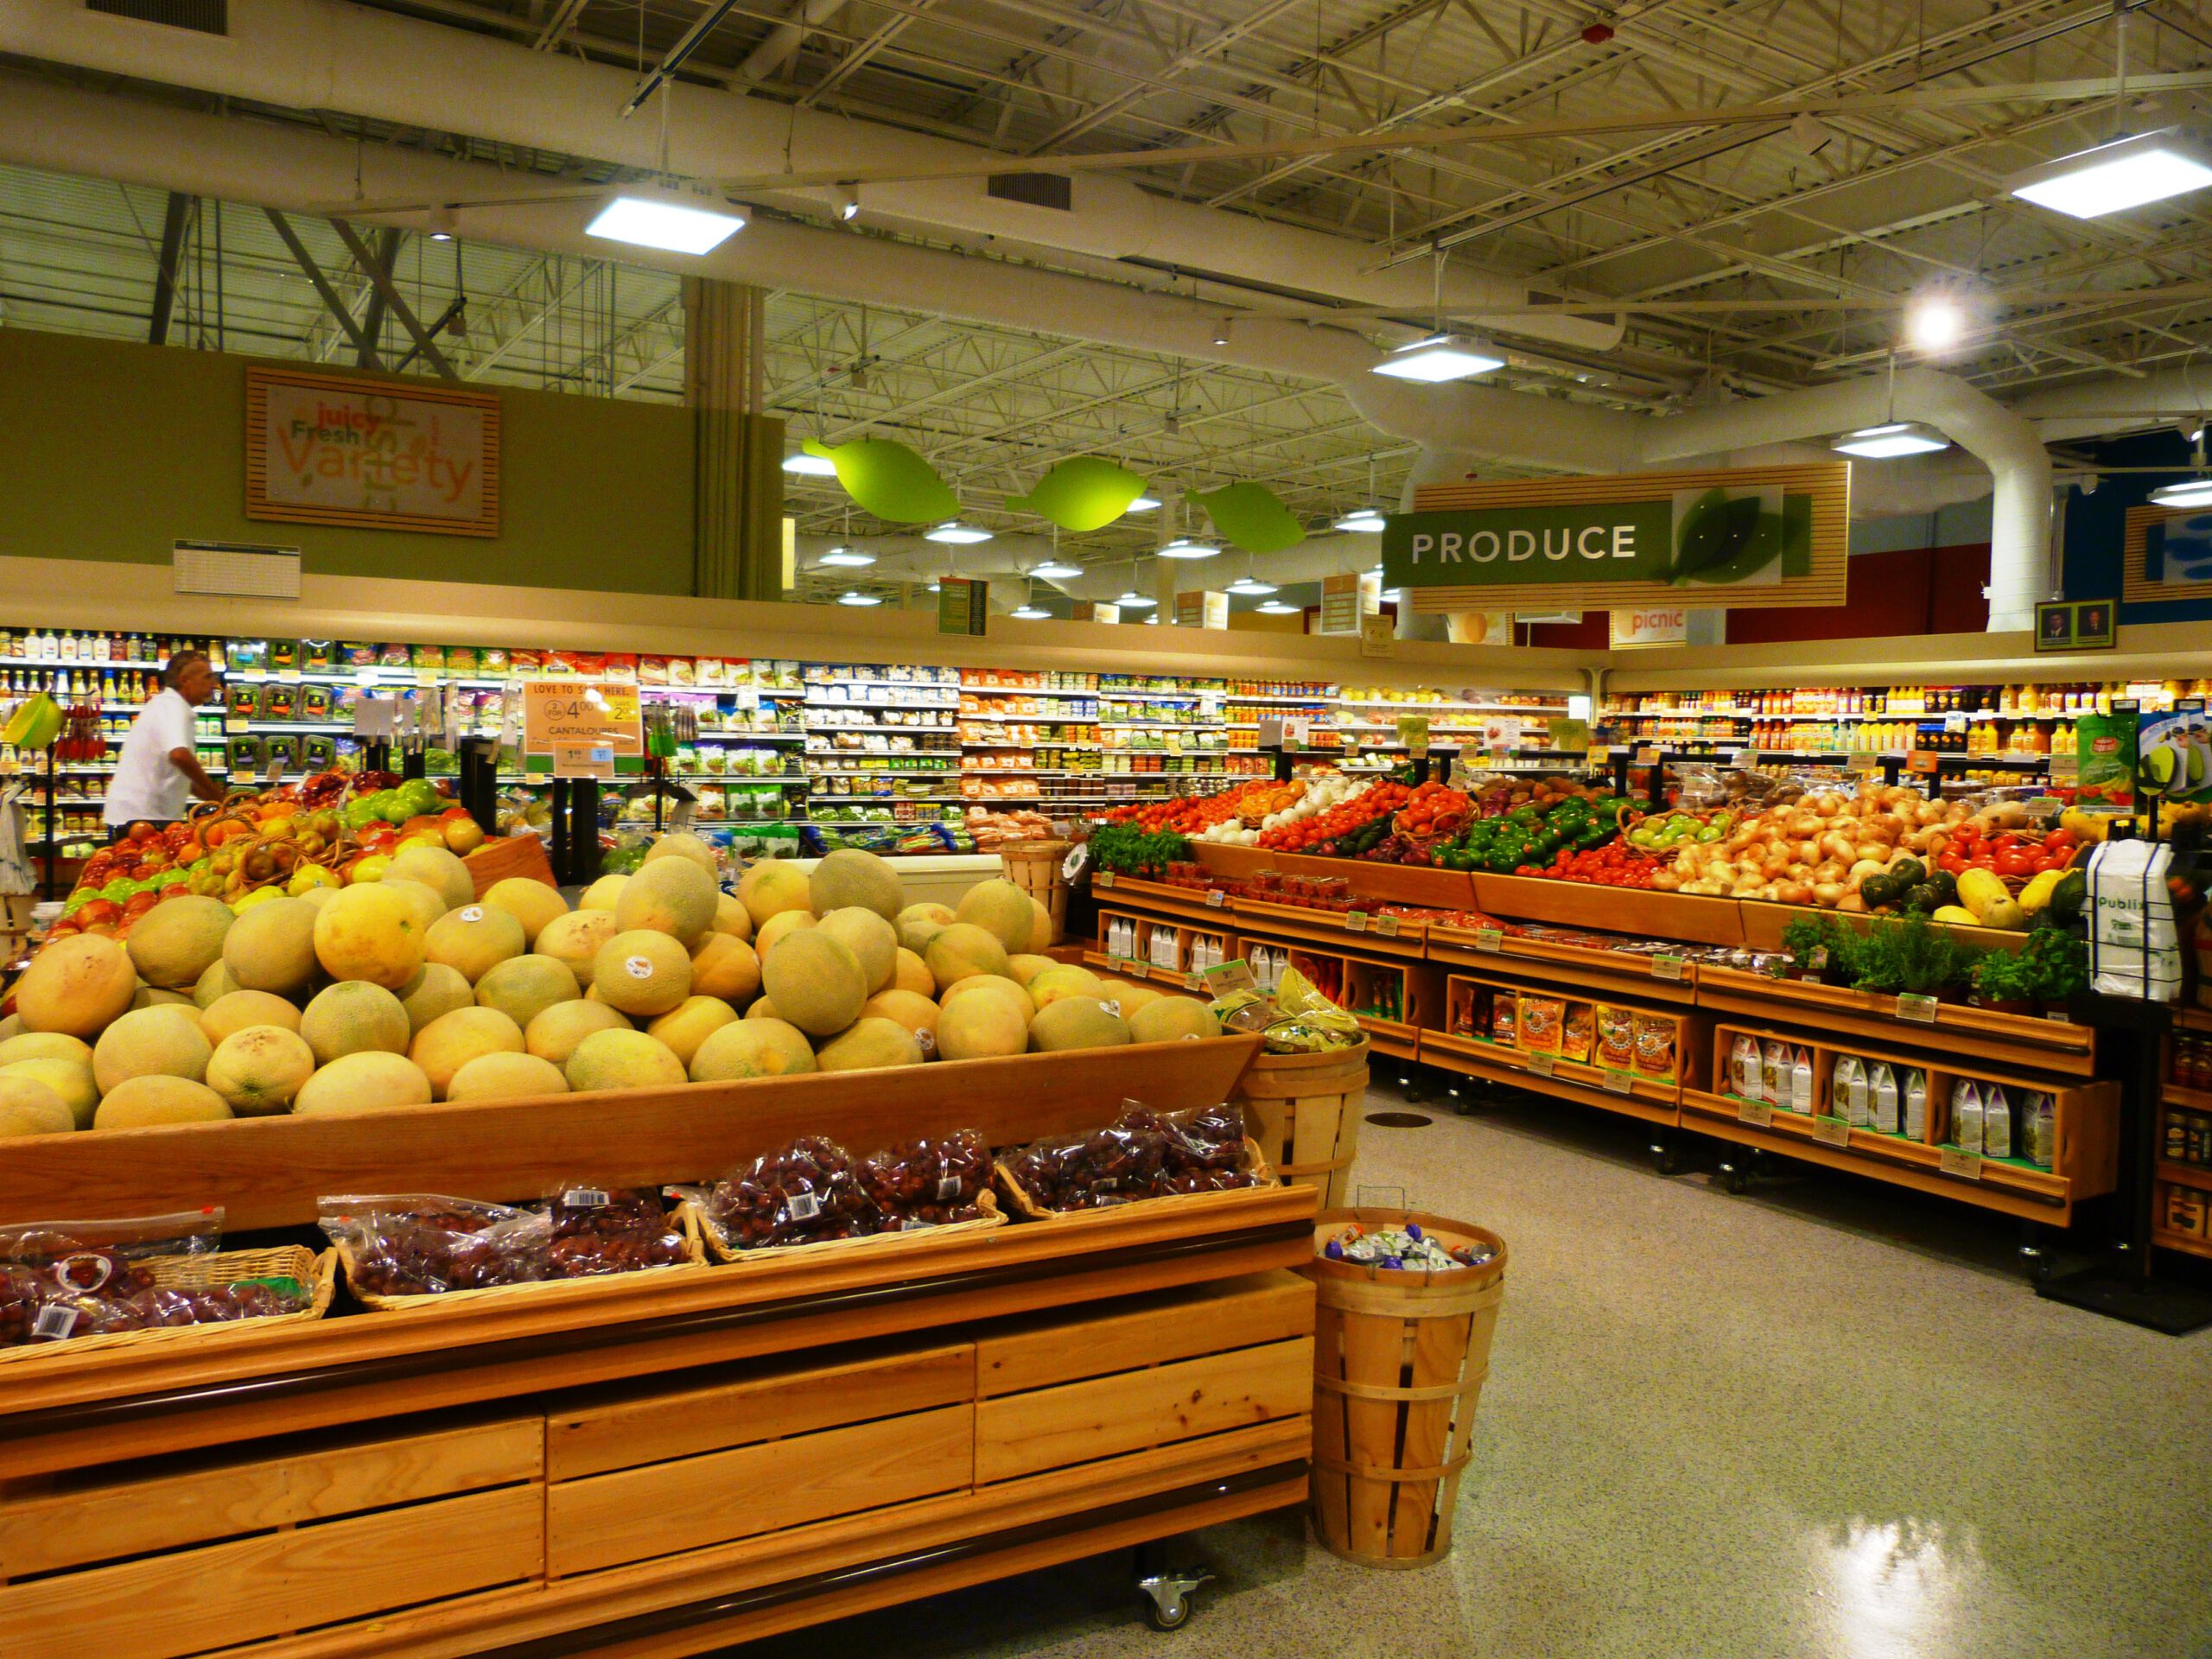 Report: Top trends in produce touch on merchandising, local offerings, health